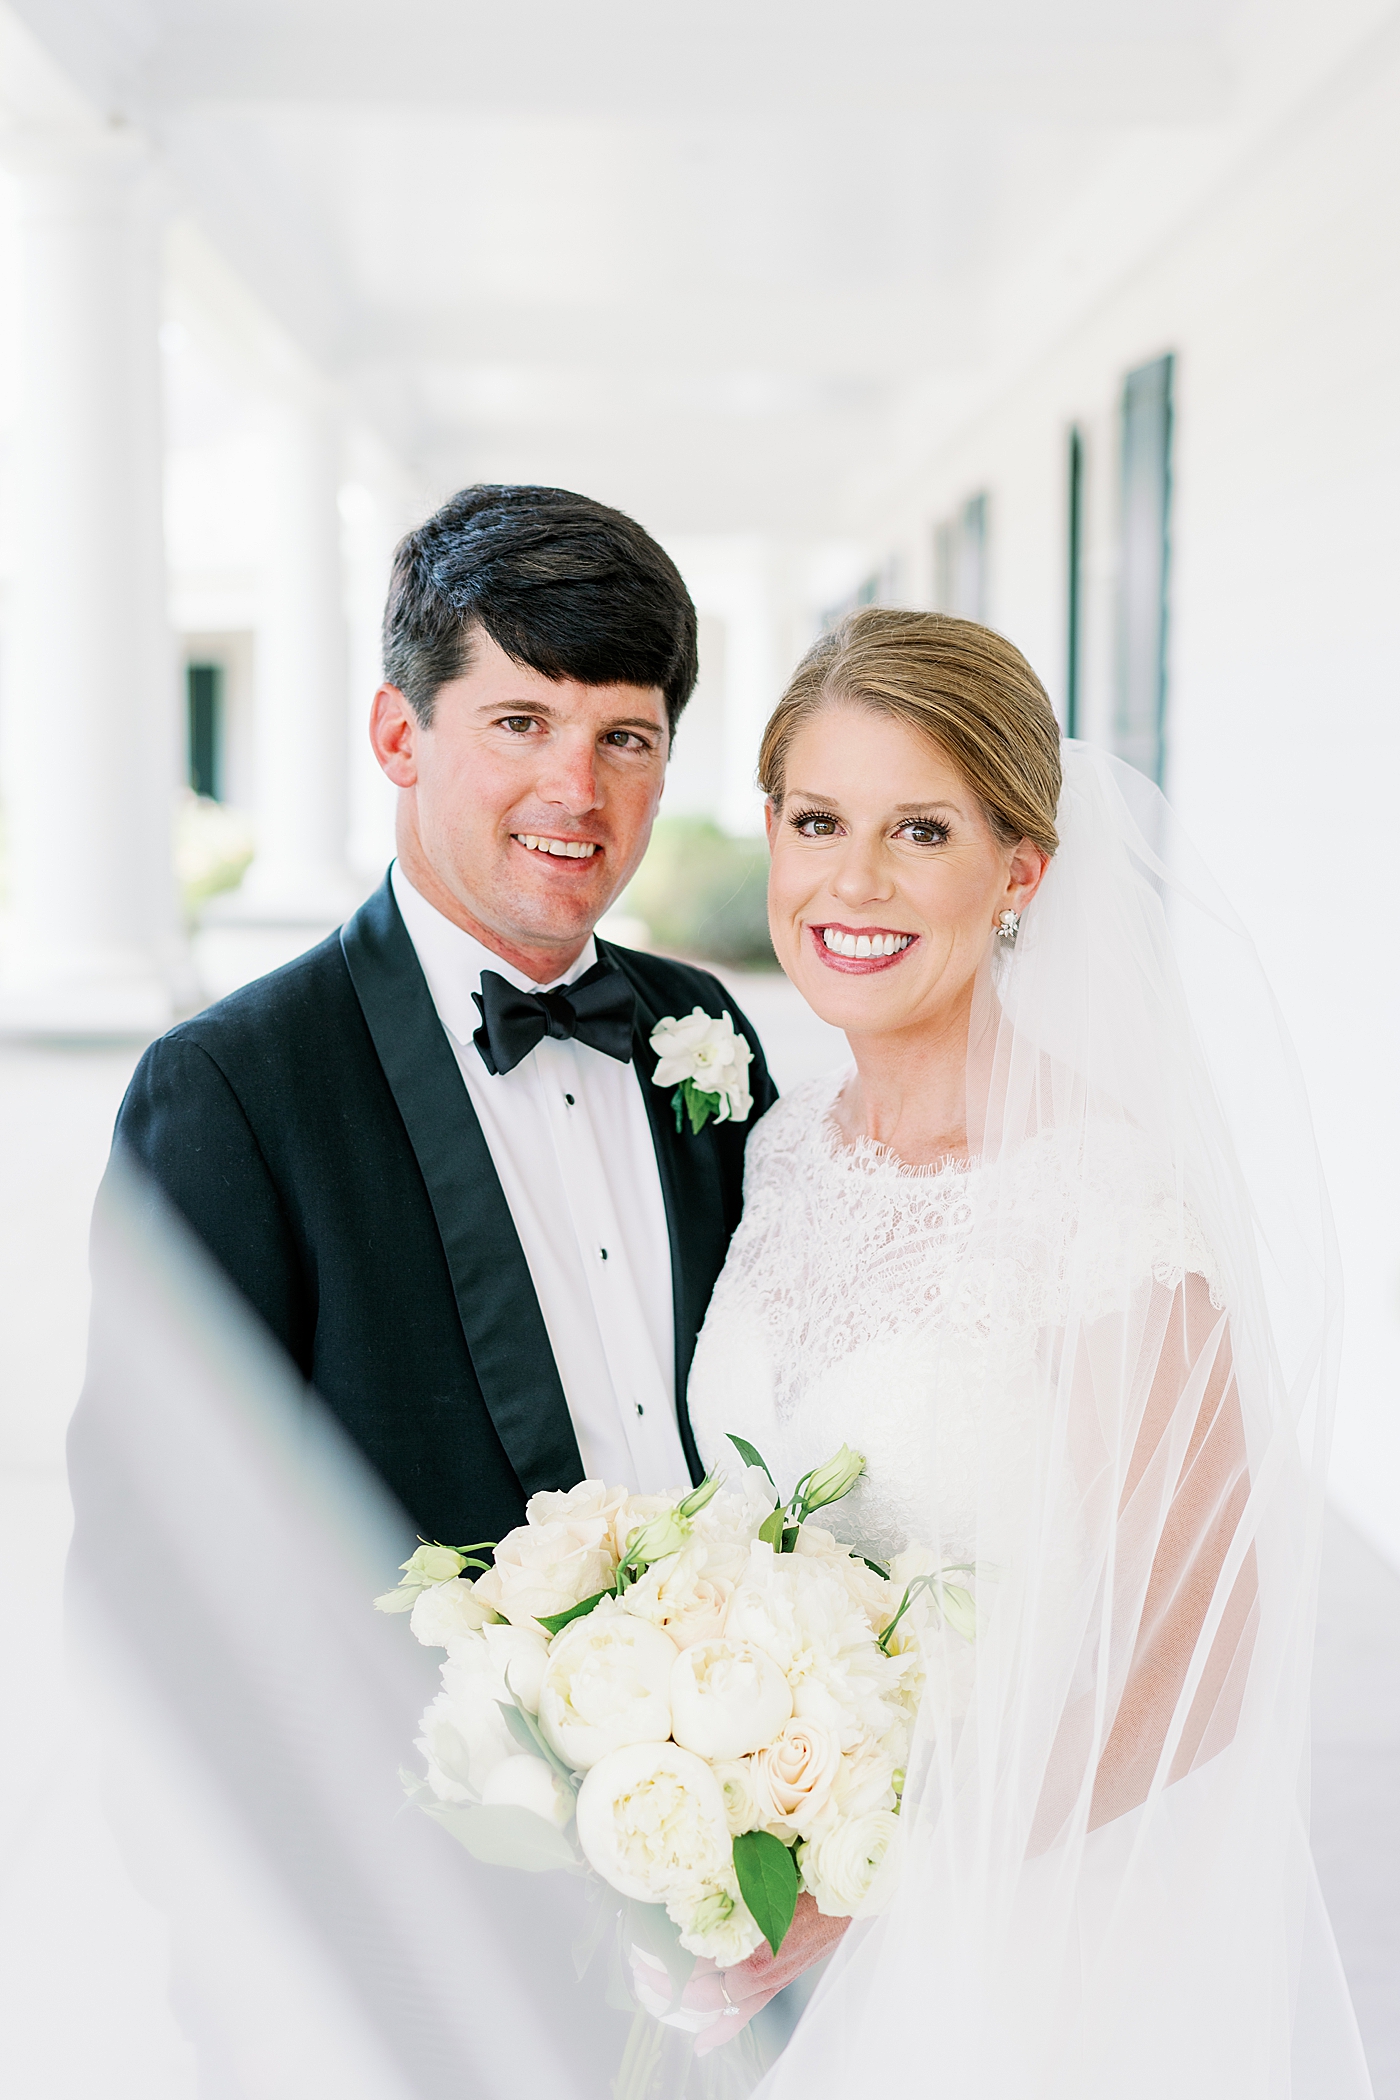 Bride and groom smiling together after their first look | Image by Annie Laura Photo